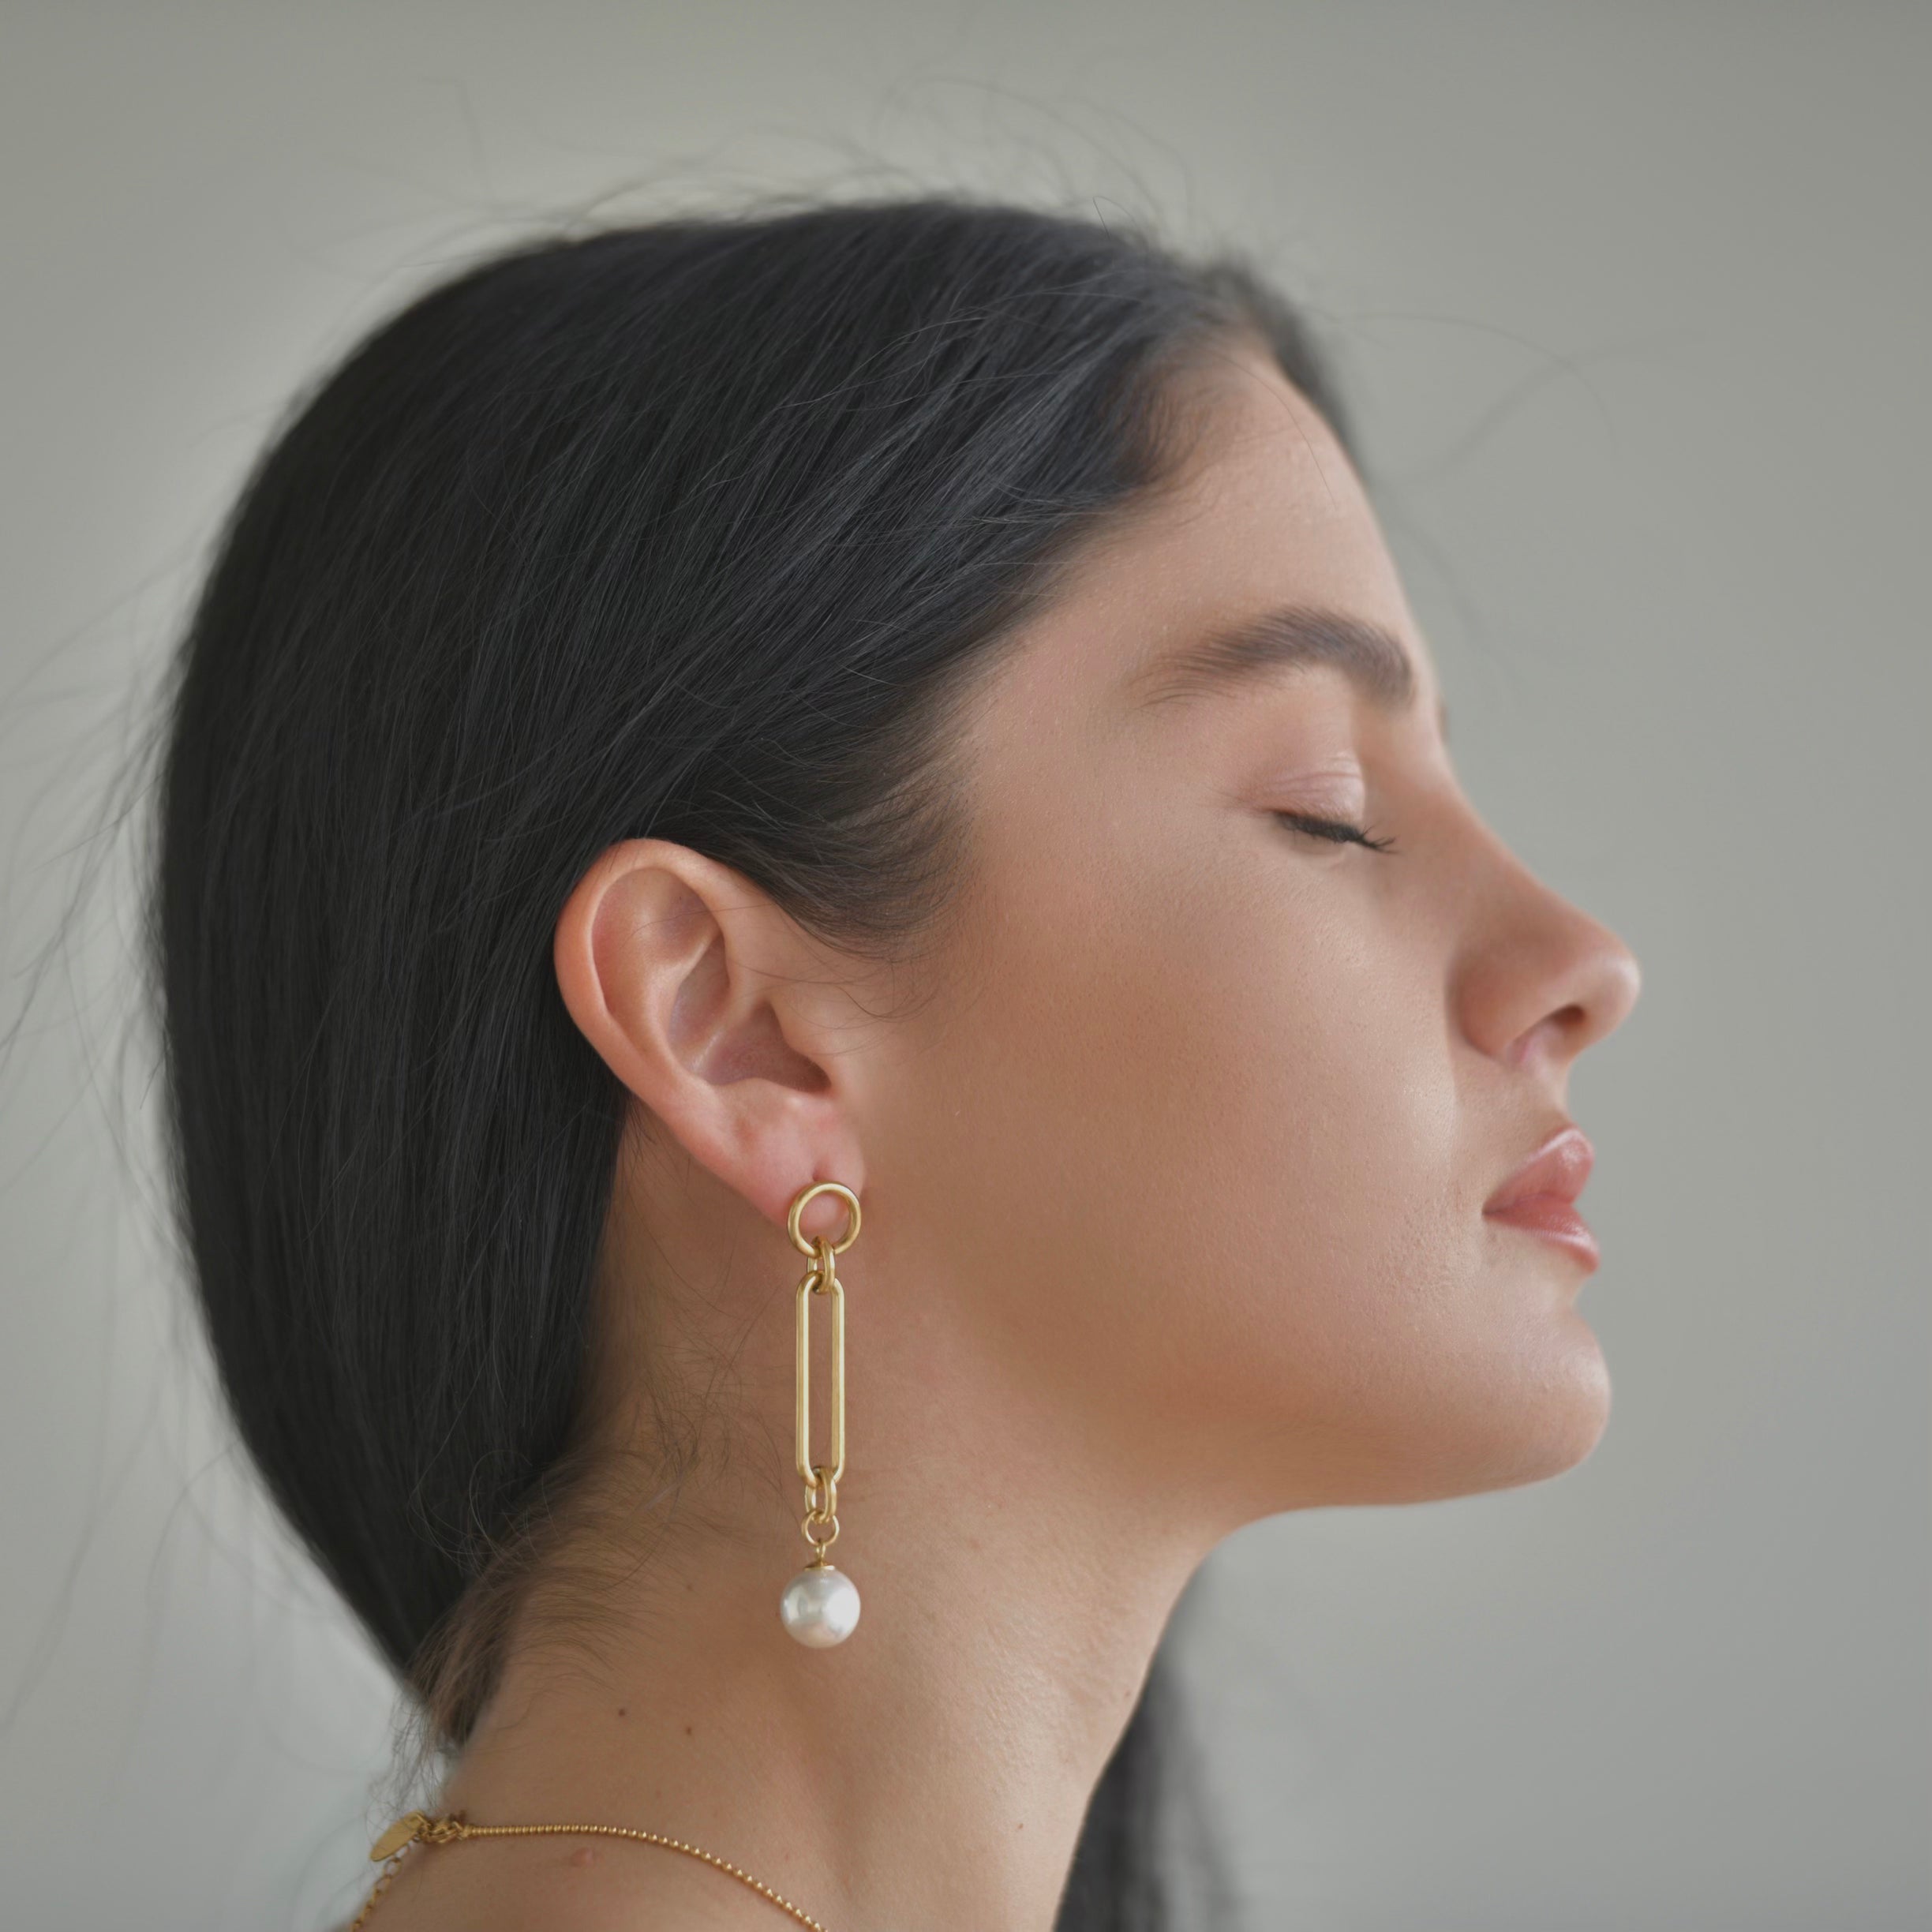 Gold plated earrings with a top small round hoop, a retacngle oval shape droping in the middle and a pearl droping at the bottom.